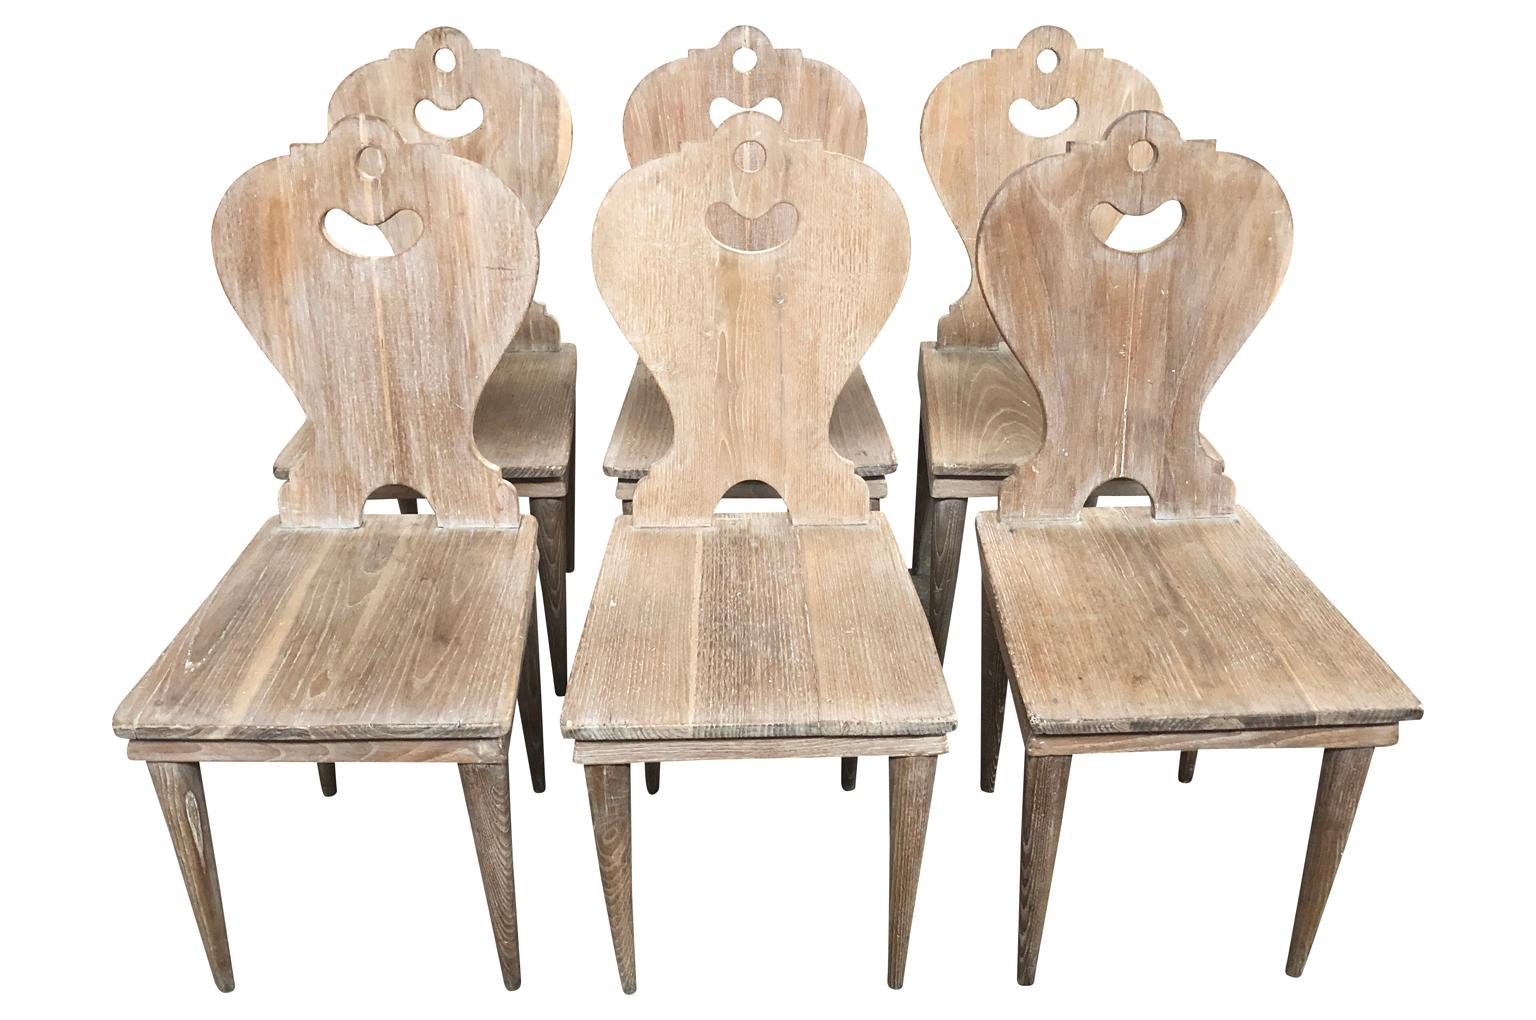 Set of 6 Arte Populaire - Folk Art dining chairs from the Ardeche region of France. Soundly constructed from scraped wood with a wonderfully shaped back and tapered legs.